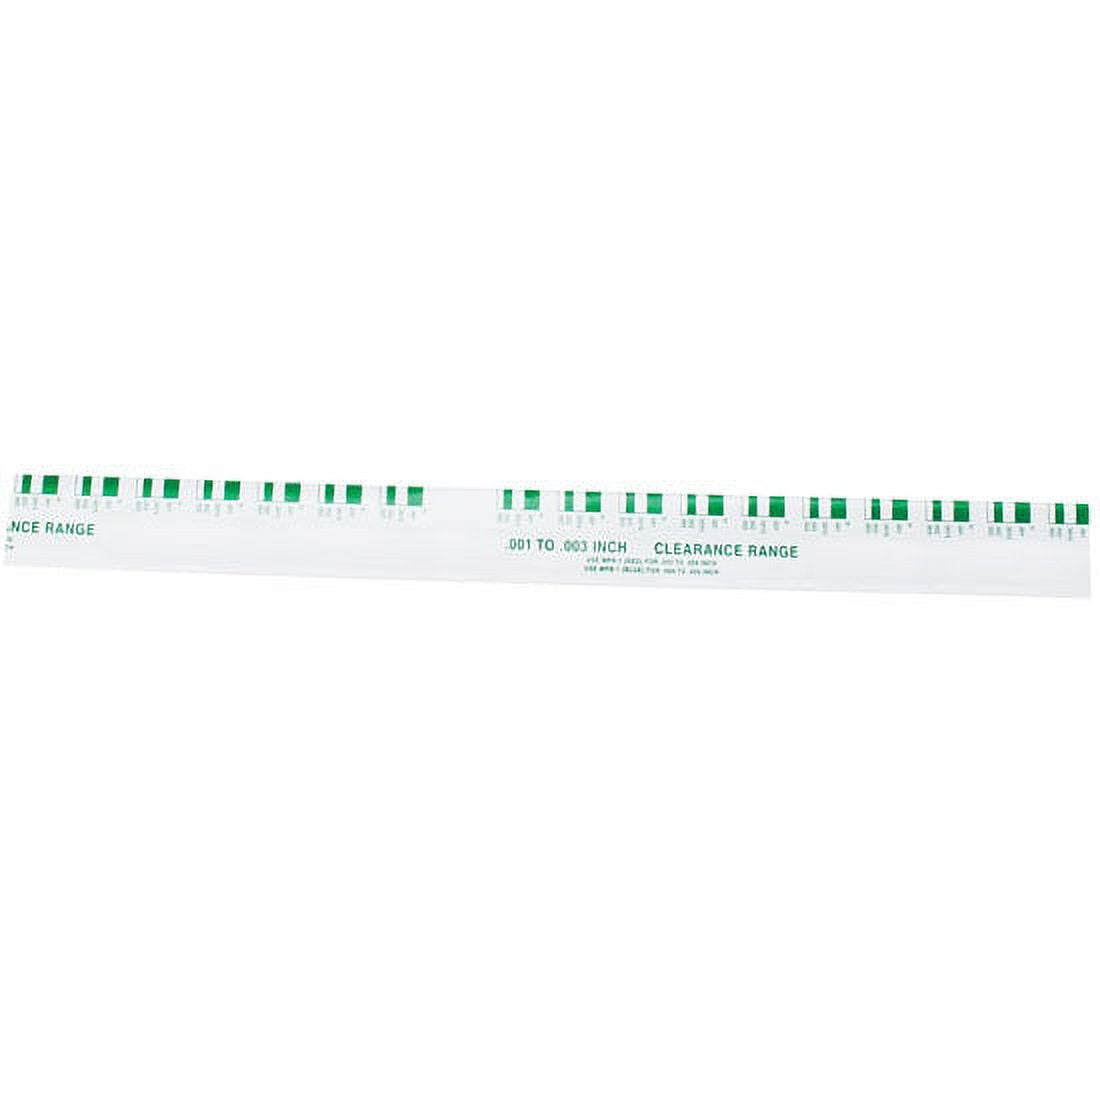 Green Plastigauge for Bearing Clearance, .001-.003 Inch 